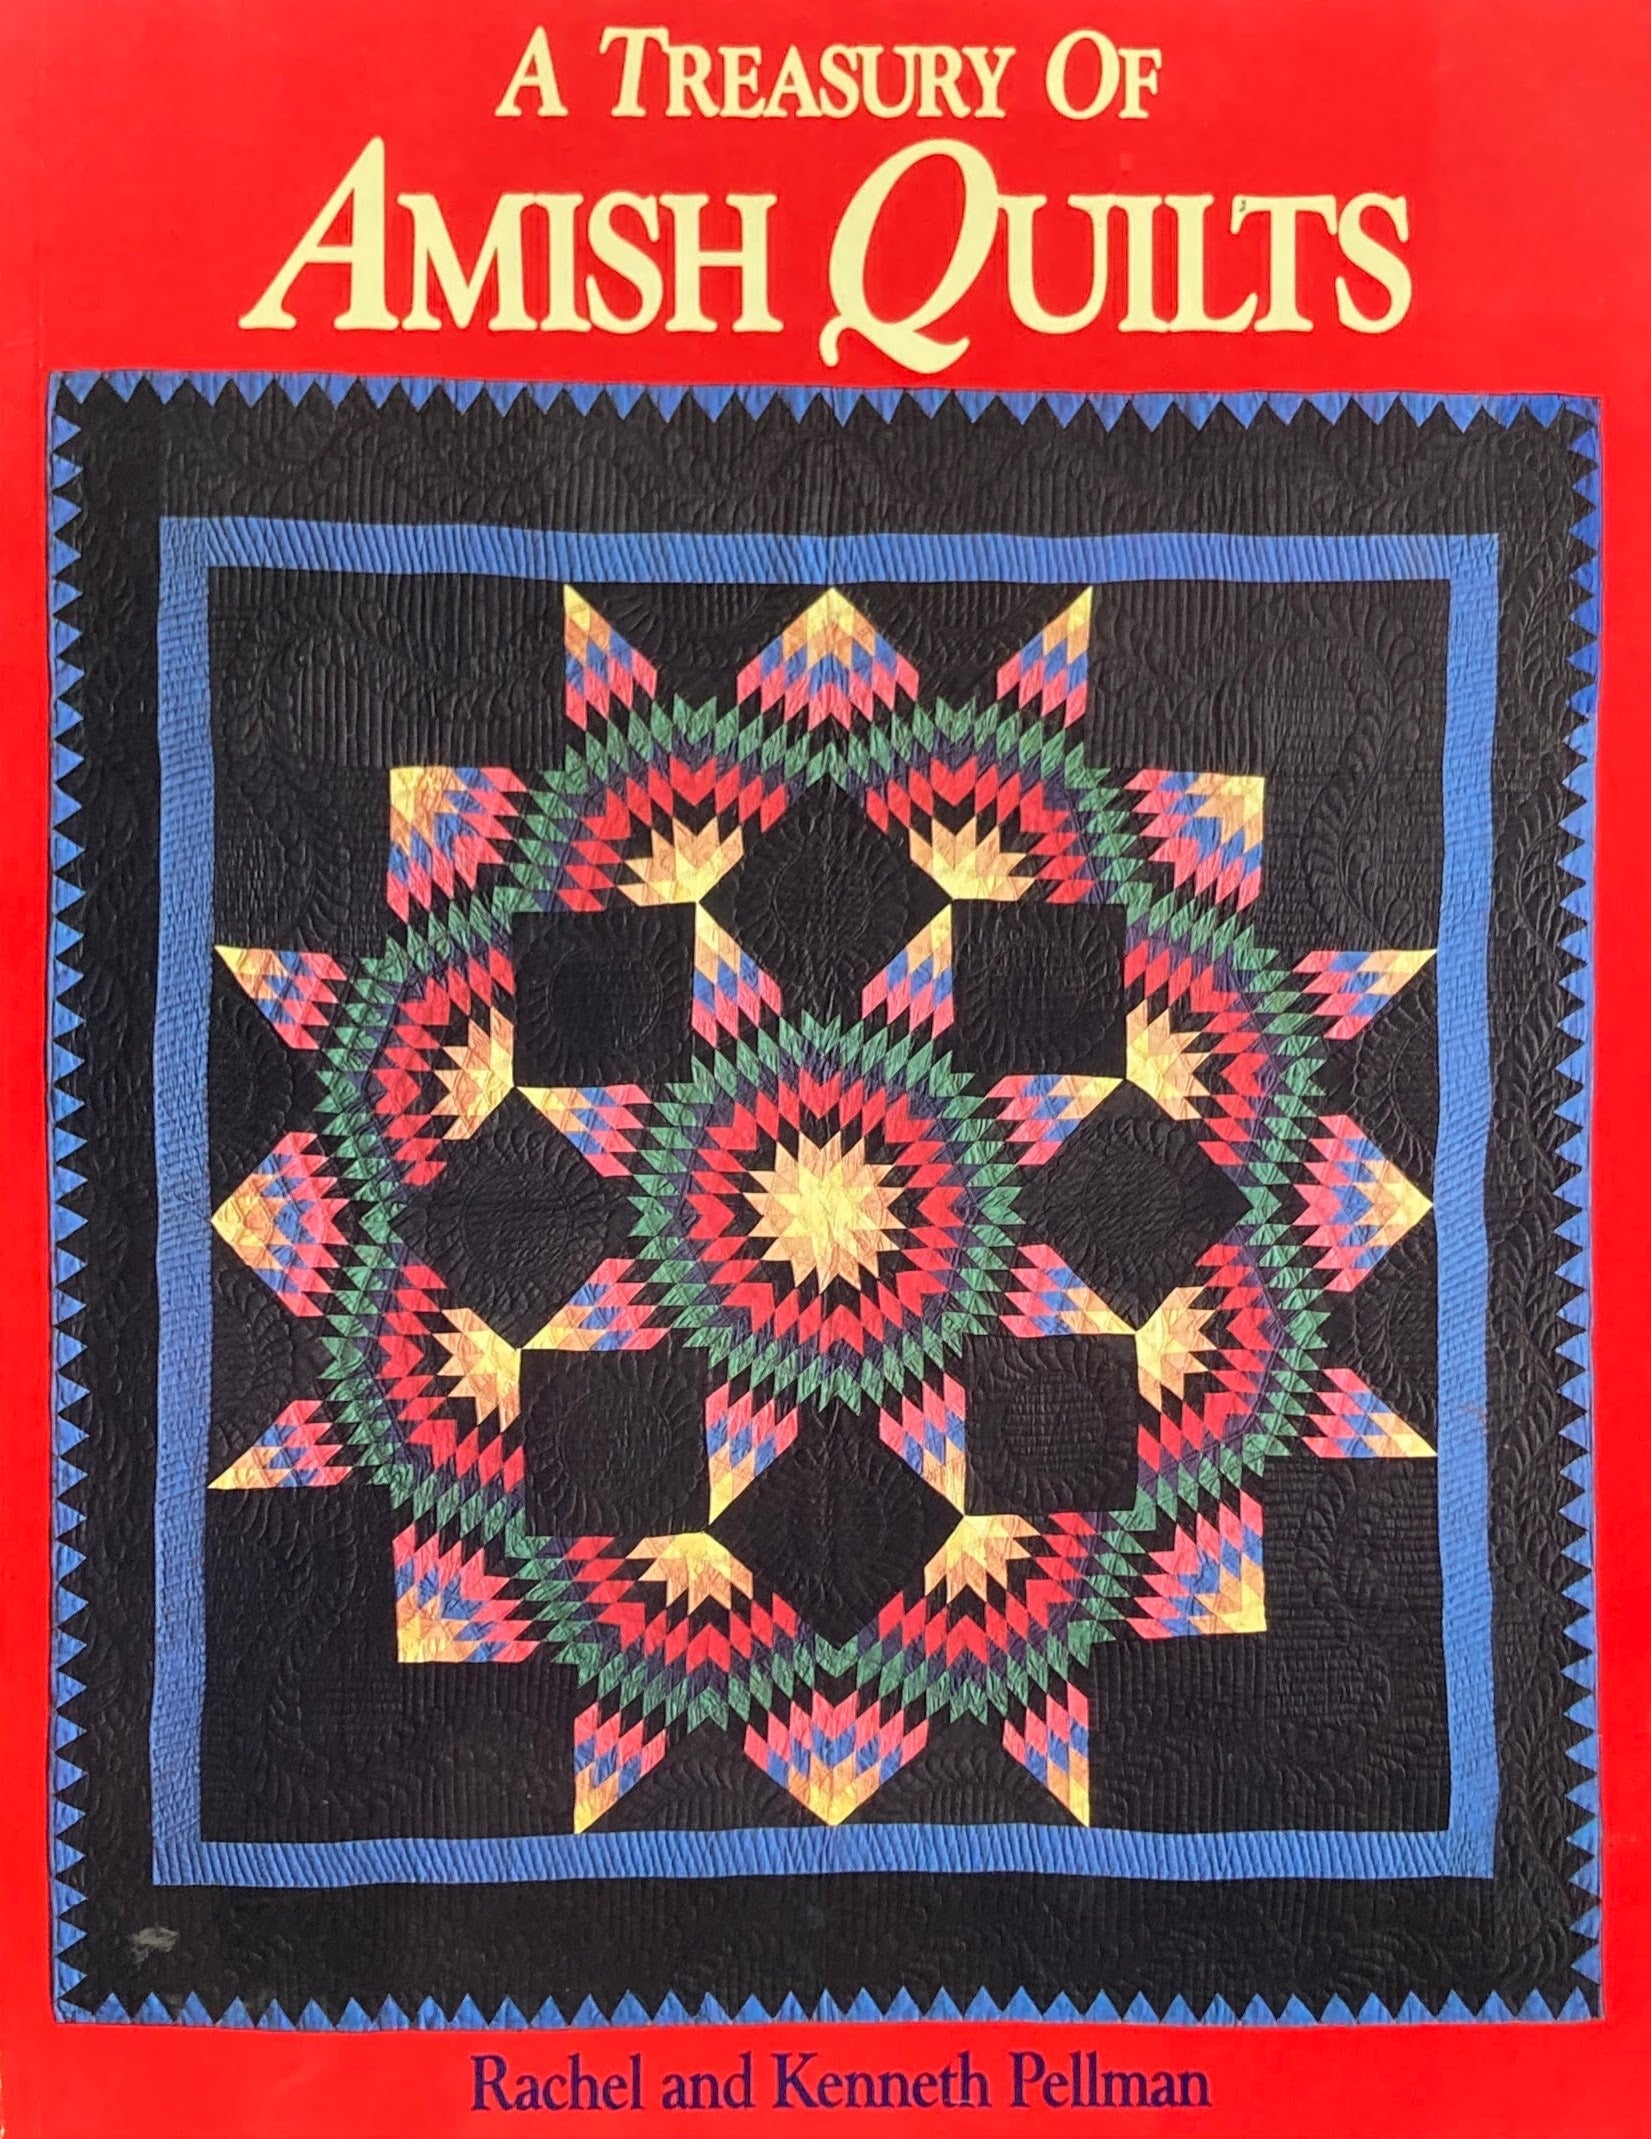 A Treasury of Amish Quilts　Rachel and Kenneth Pellman